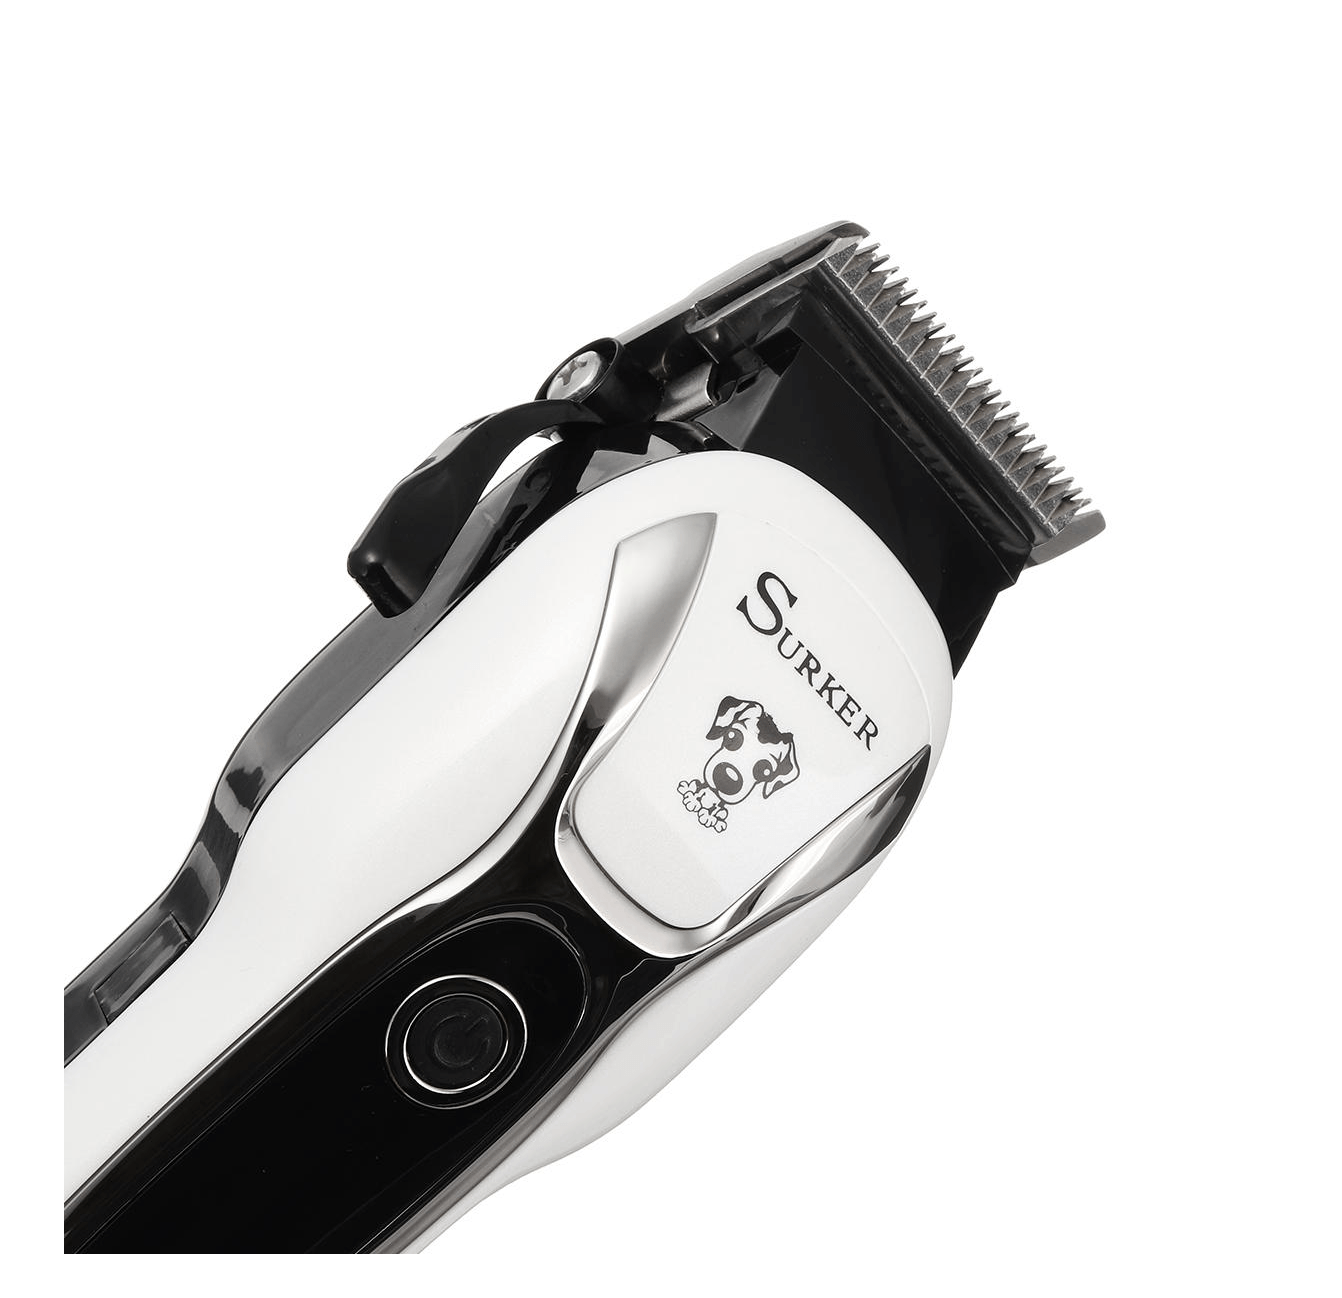 Pet Clipper Rechargeable Cat Dog Electric Trimmer Hair Cutter Shaver Grooming Tool Kit